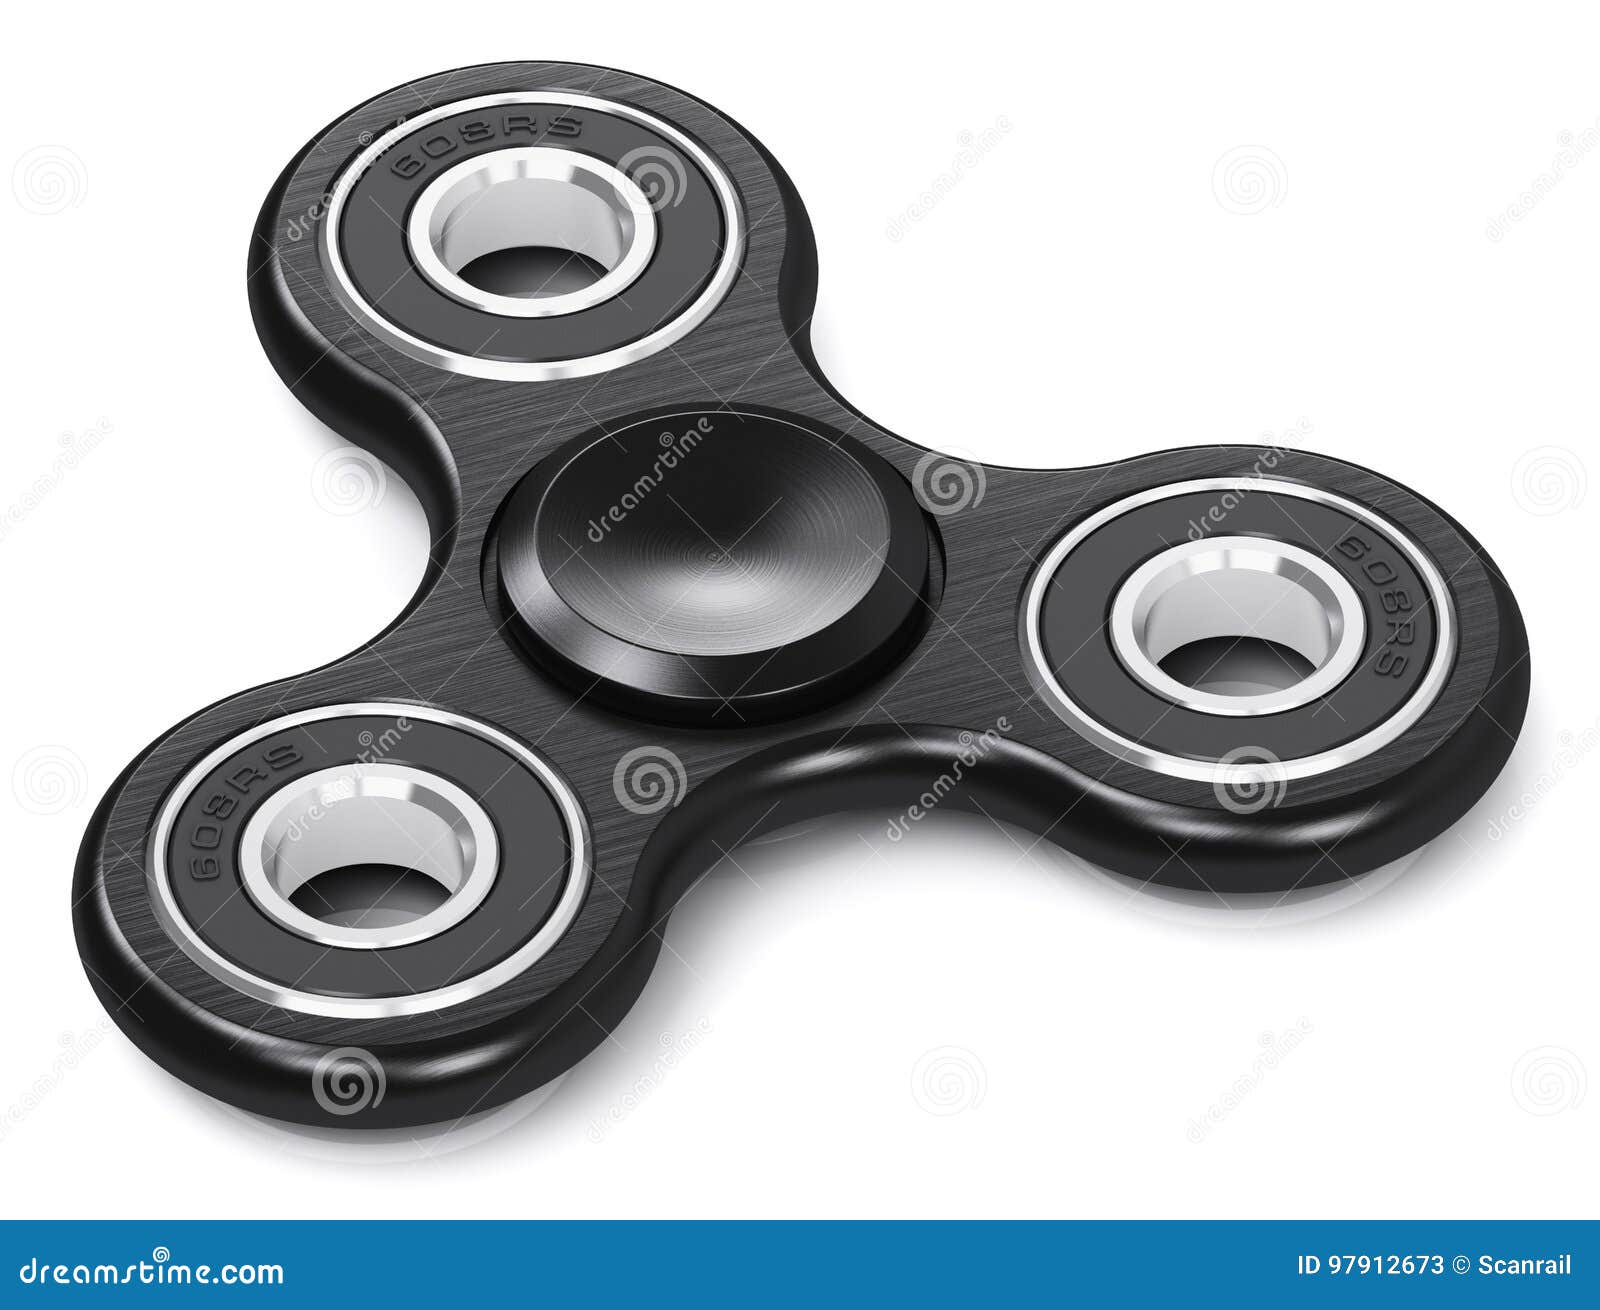 62,865 Spinner Images, Stock Photos, 3D objects, & Vectors